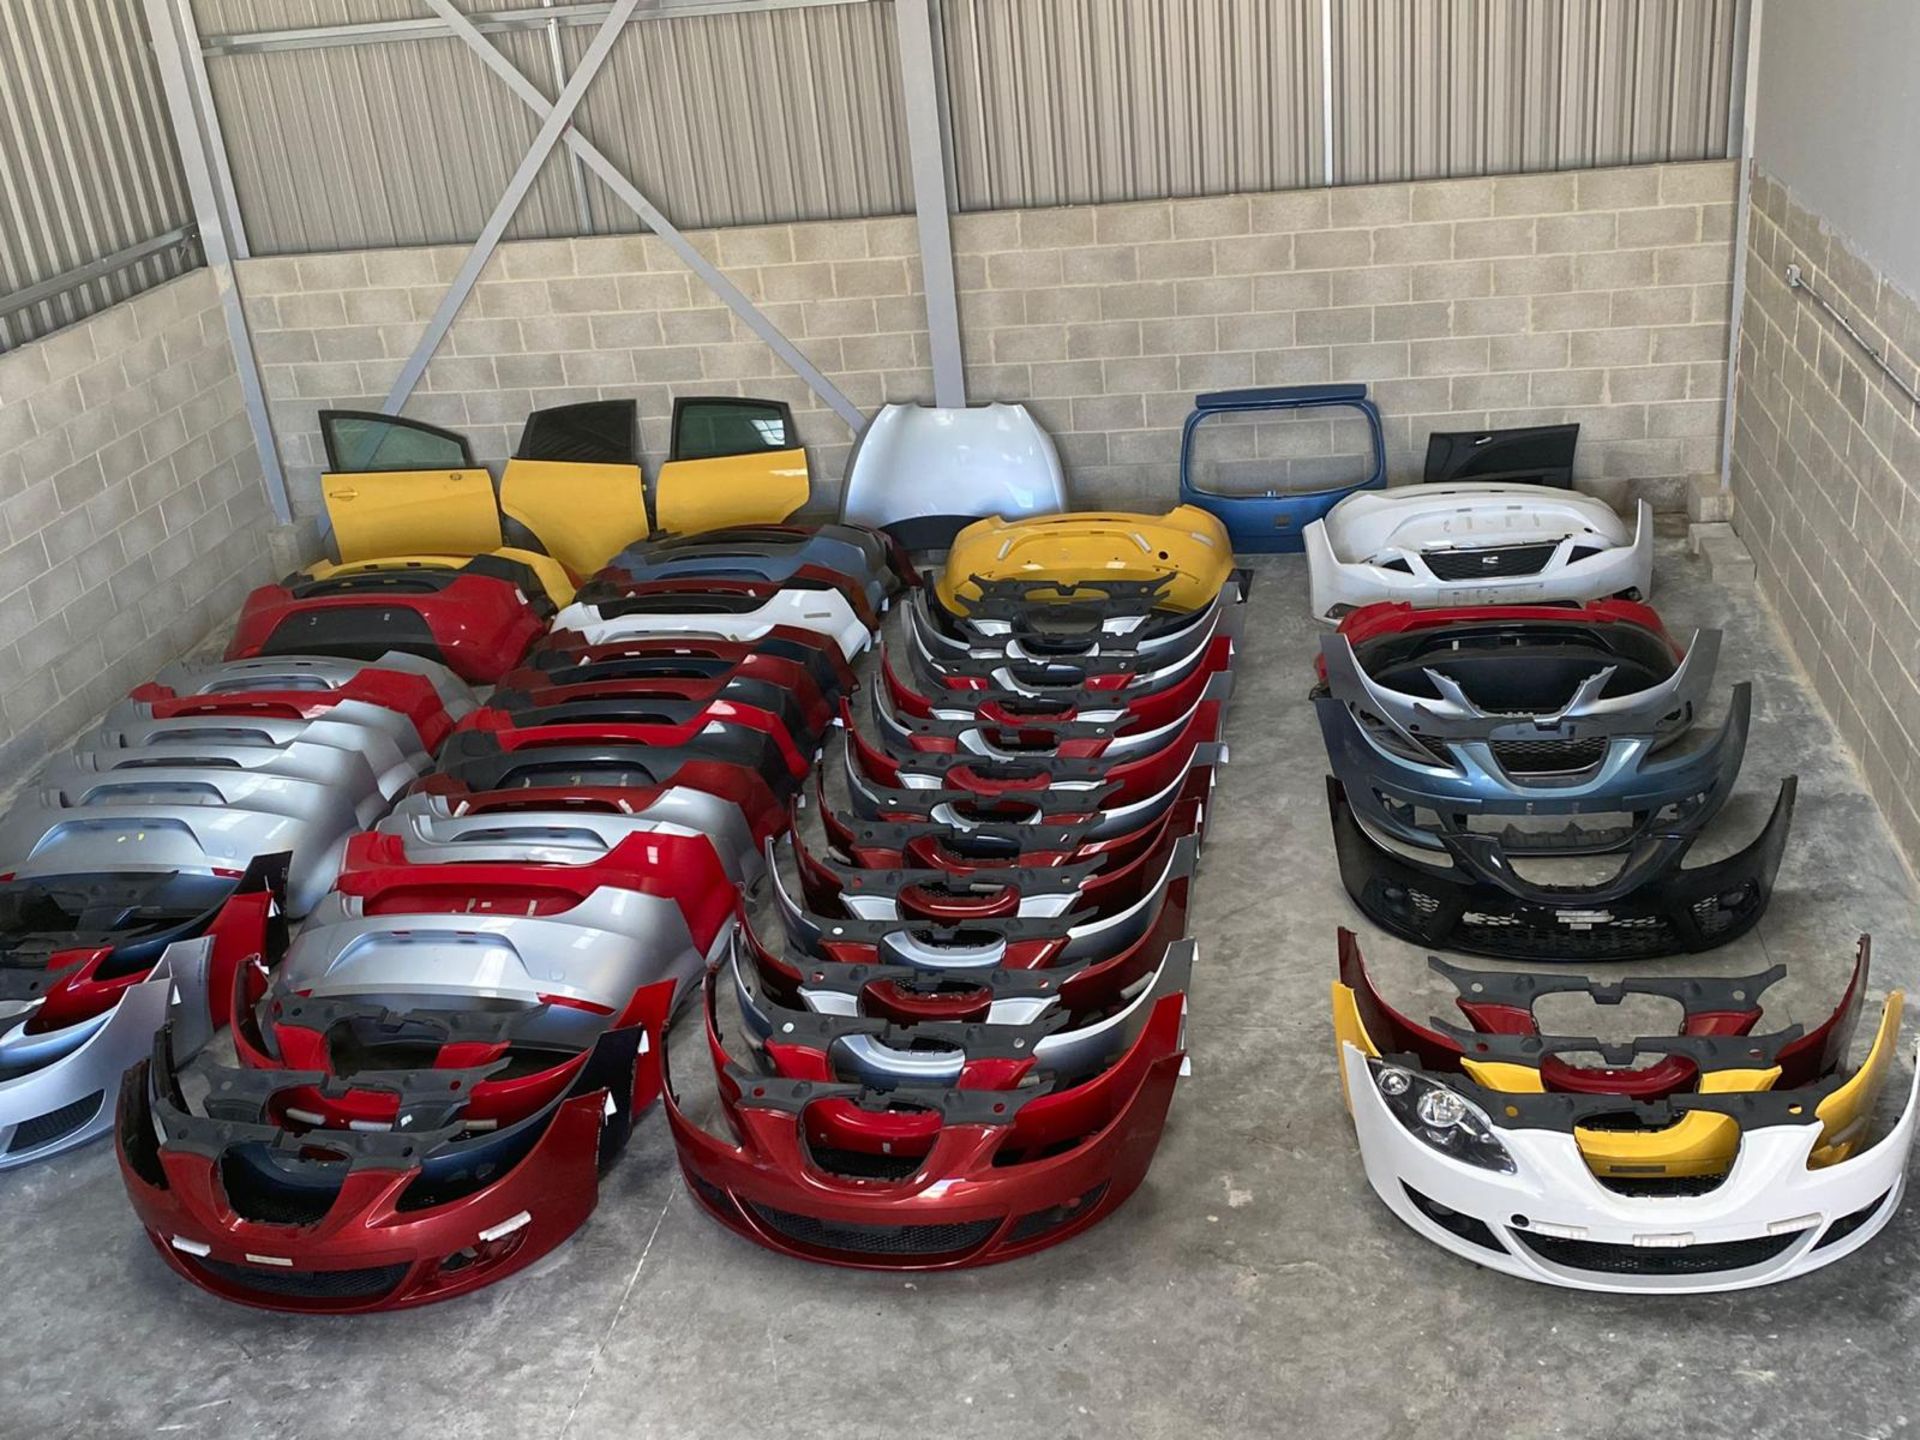 LARGE JOB LOT OF NEW AND NEARLY NEW SEAT CAR PARTS, RRP OVER £22K, GENUINE SEAT OEM PARTS *PLUS VAT*